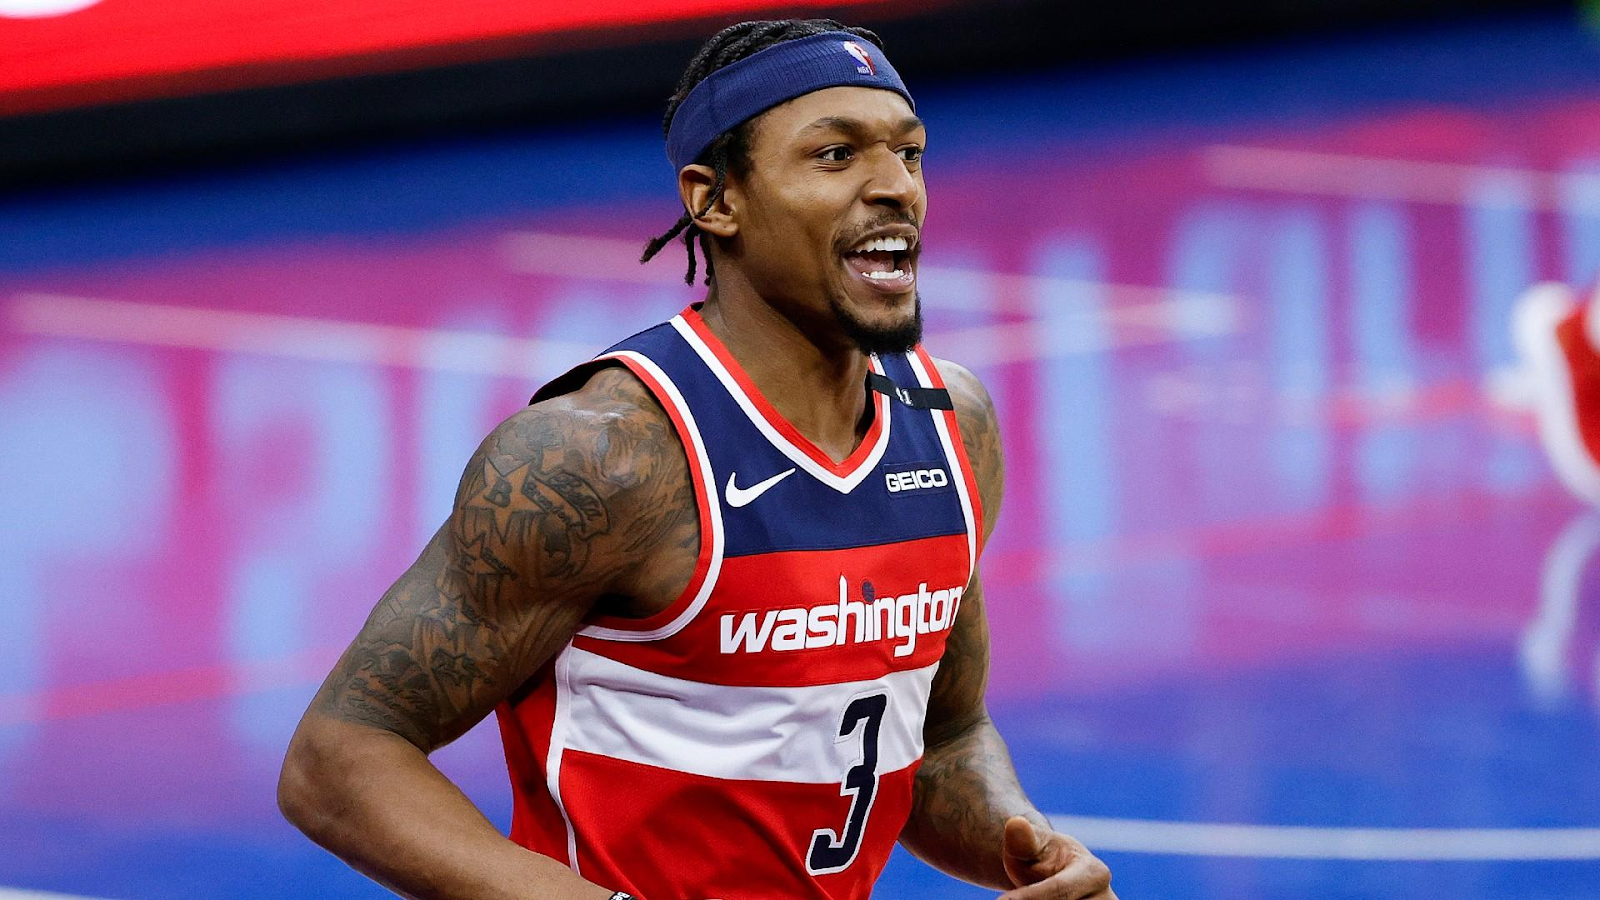 Where does Bradley Beal stand on NBA player rankings? It's time to rank players for the next season! After free agency ends each year